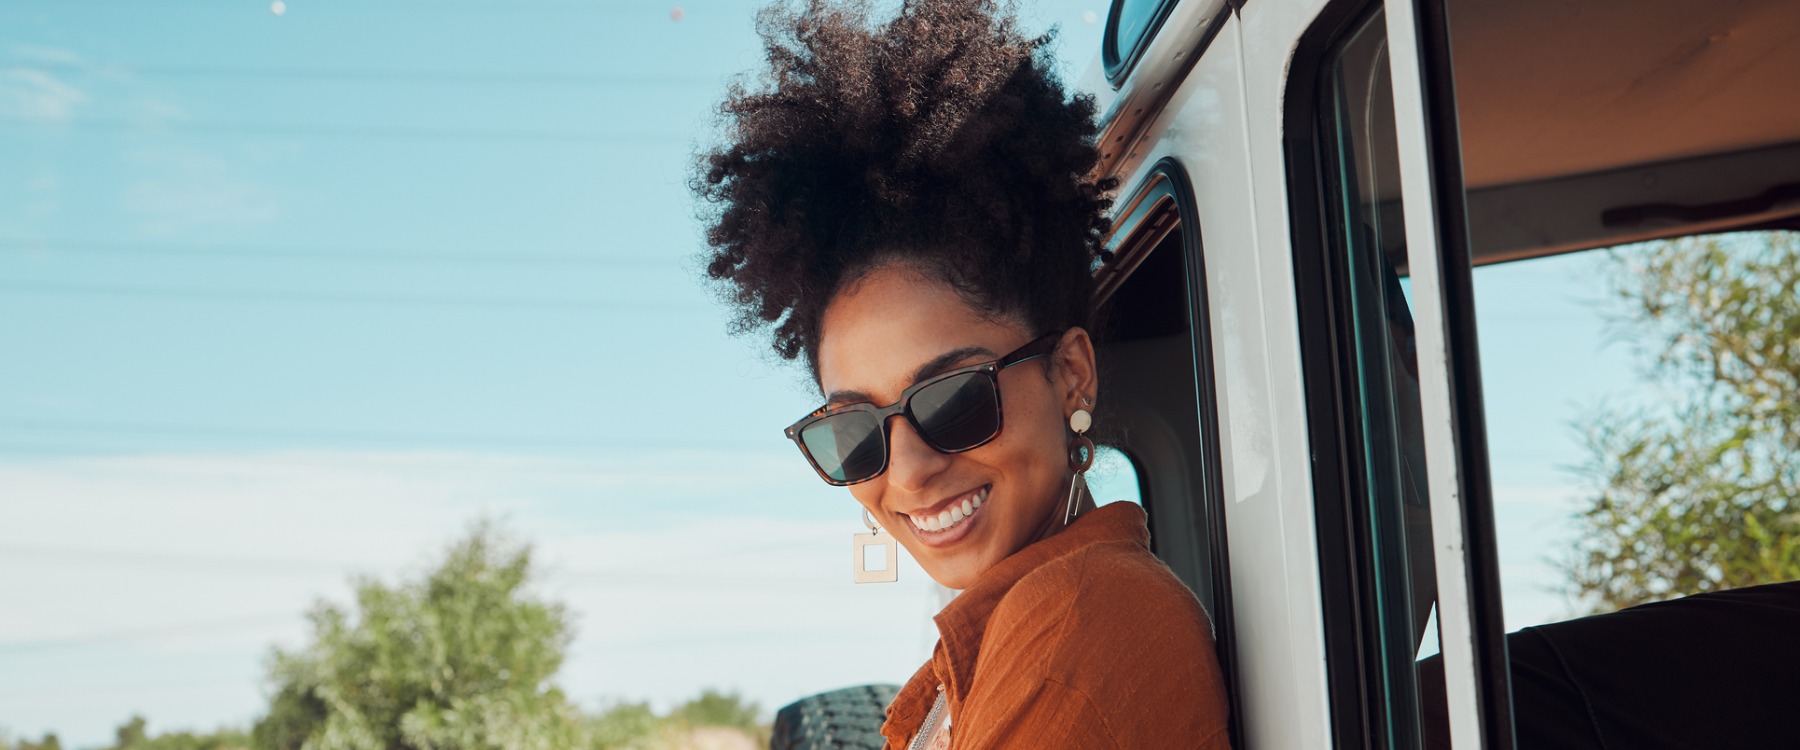 Happy woman on road trip smiling outside of car